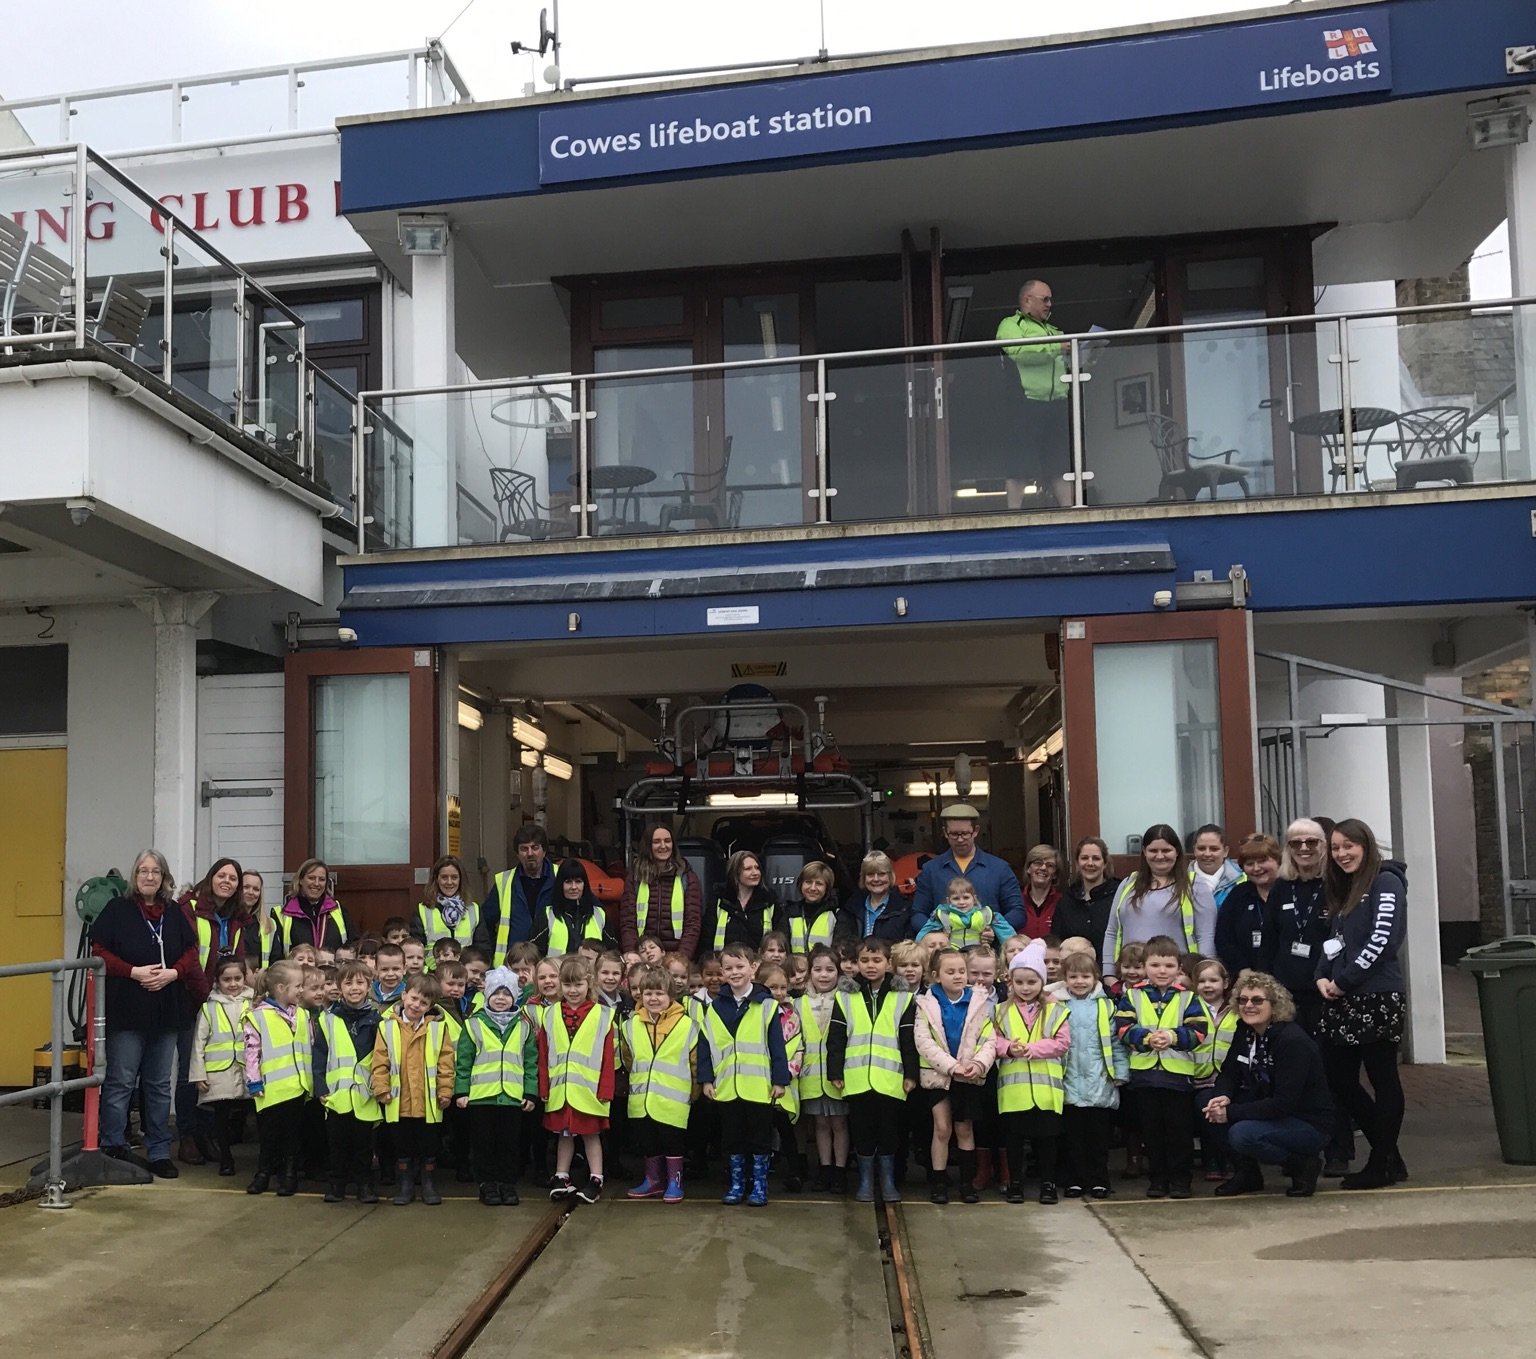 Reception visit to Cowes Lifeboat Station